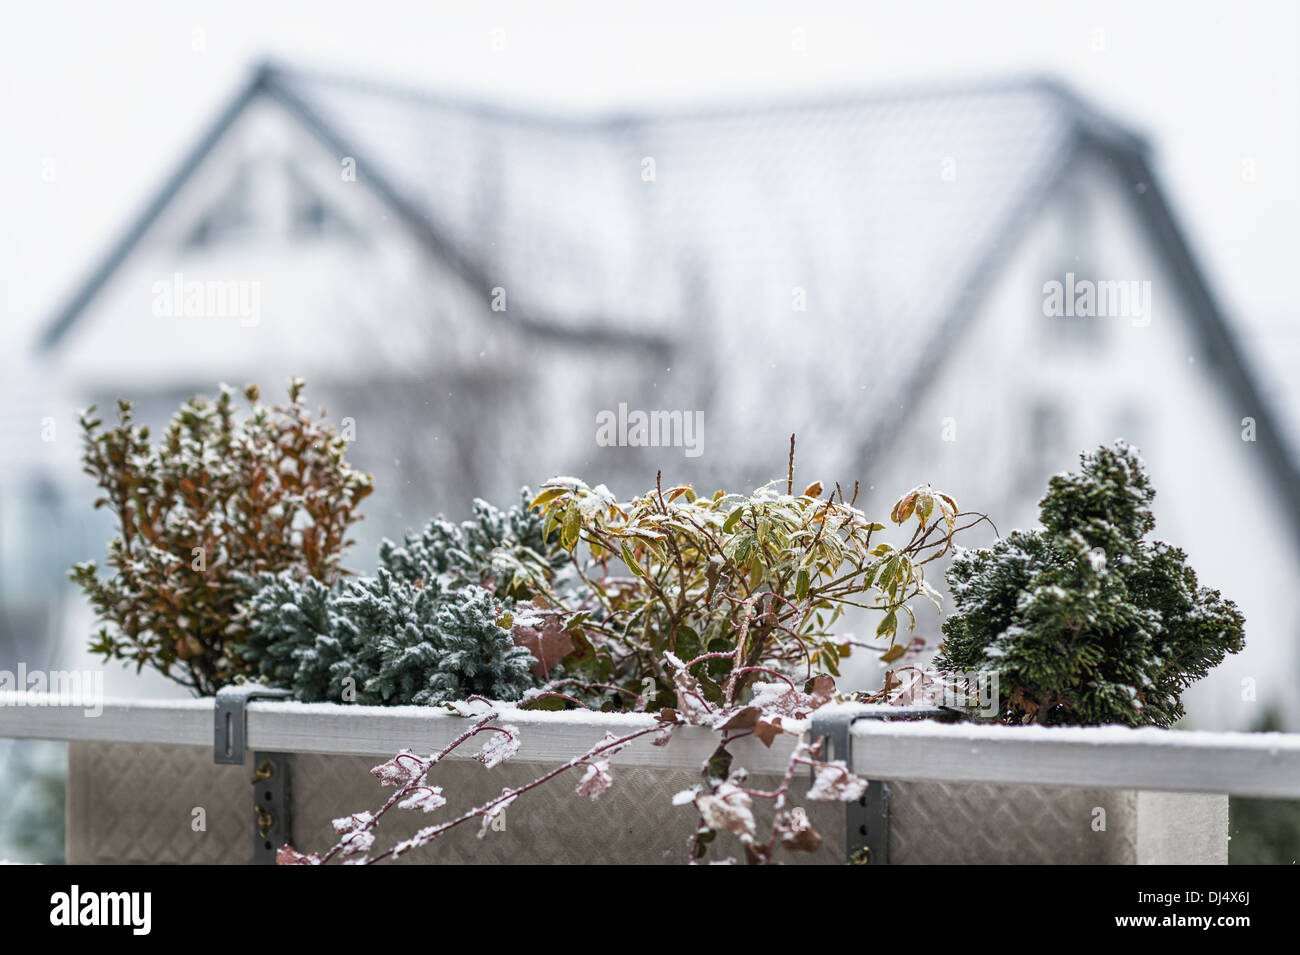 Balcony with perennials in the winter Stock Photo